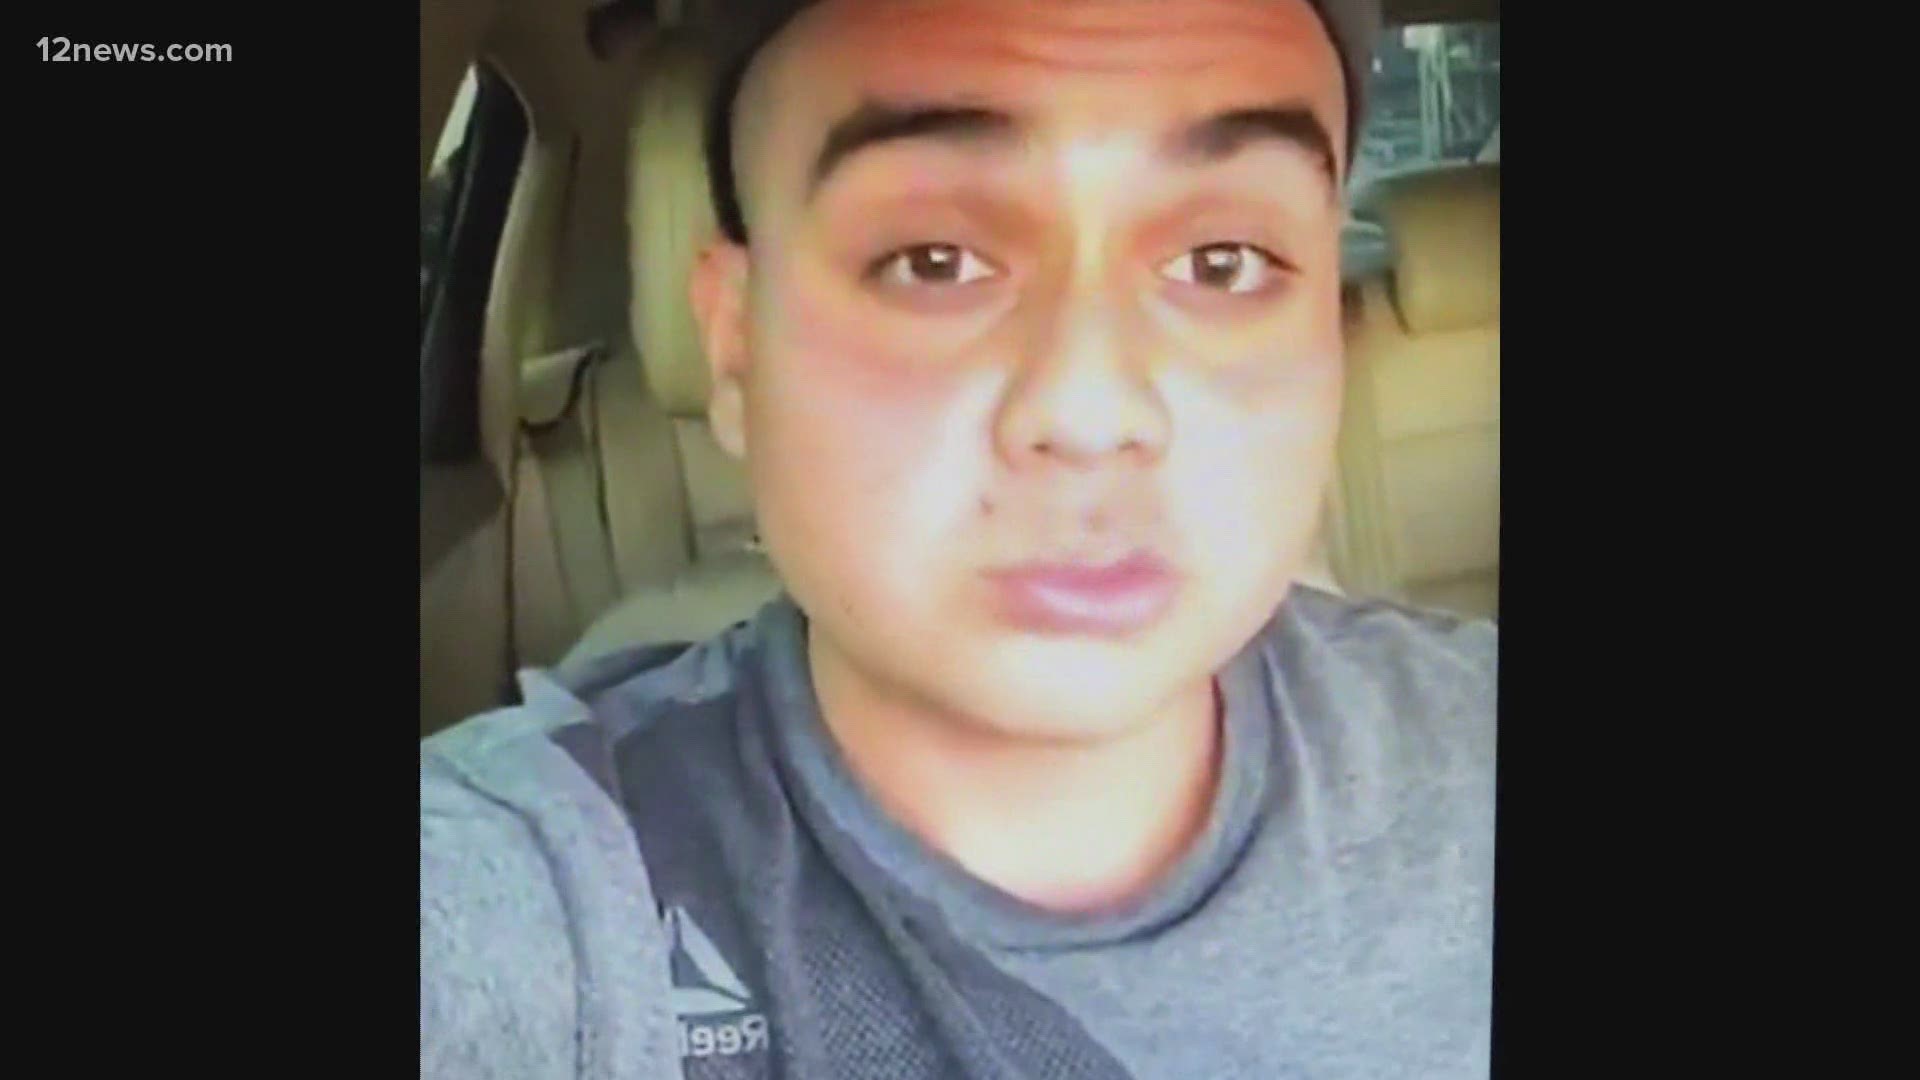 A Snapchat video posted by Hernandez foreshadowed his plans saying he would be the Westgate shooter. A former classmate told 12 News he had "antigovernment" ideas.